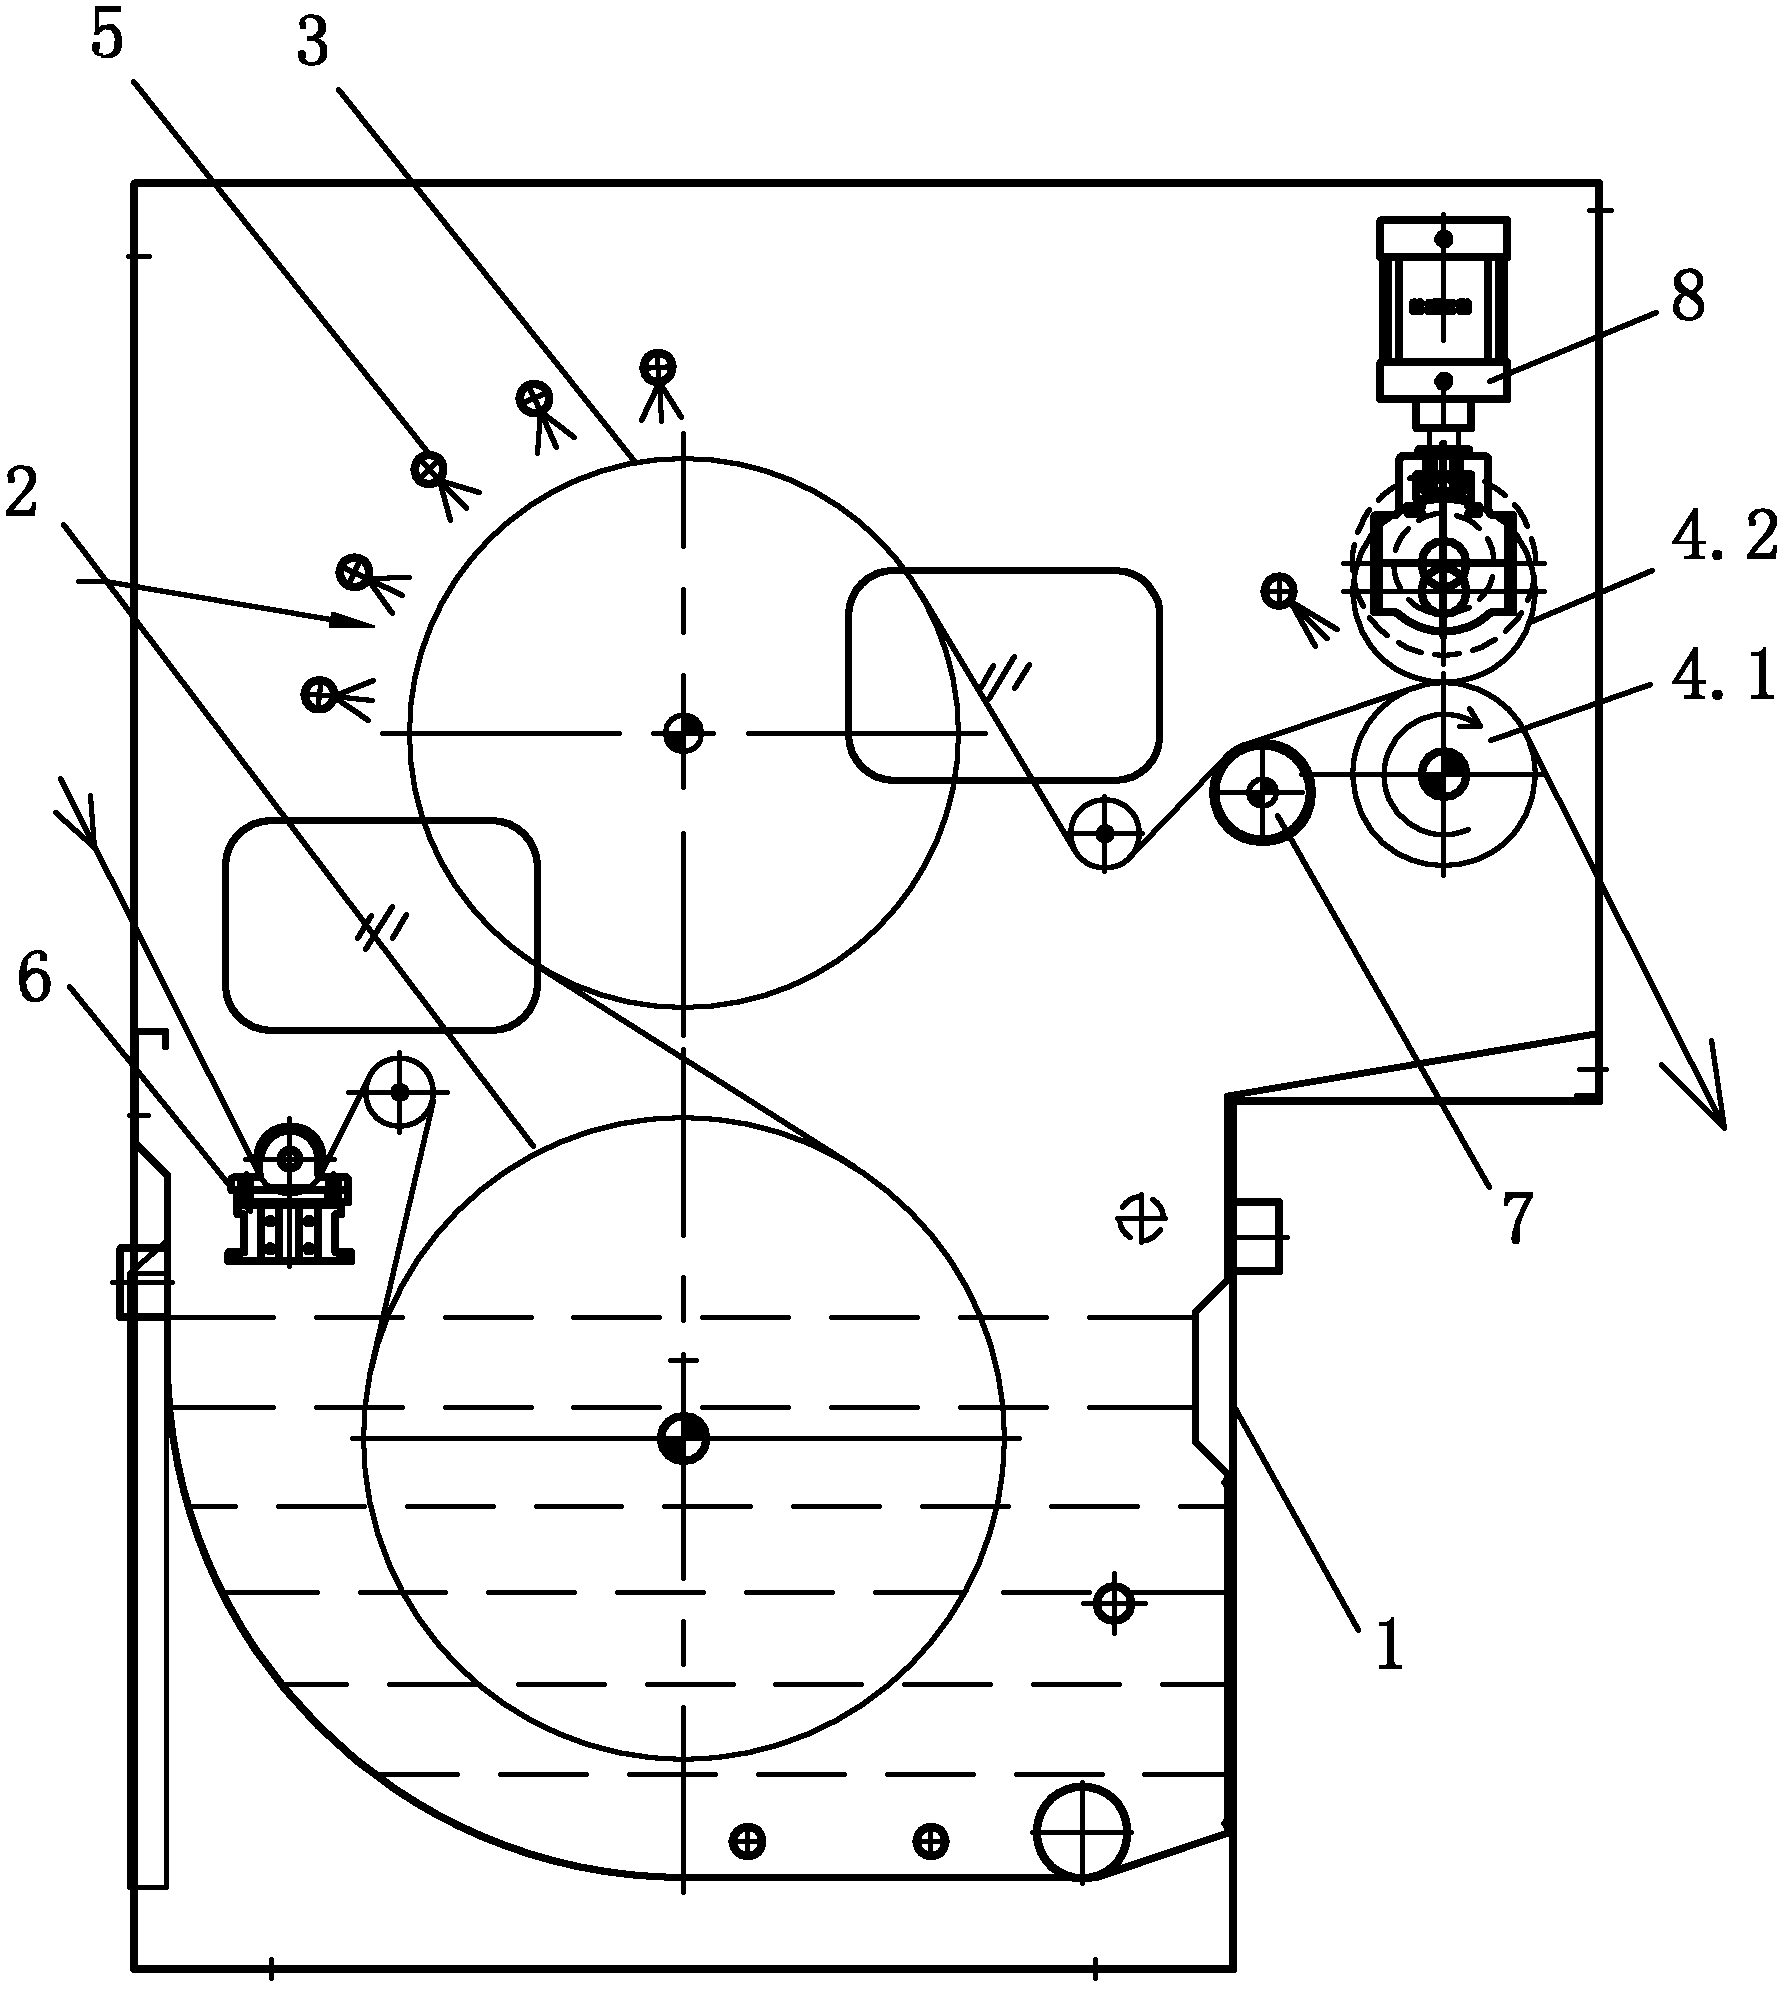 Knitting open-width wet processing unit with spray washing device